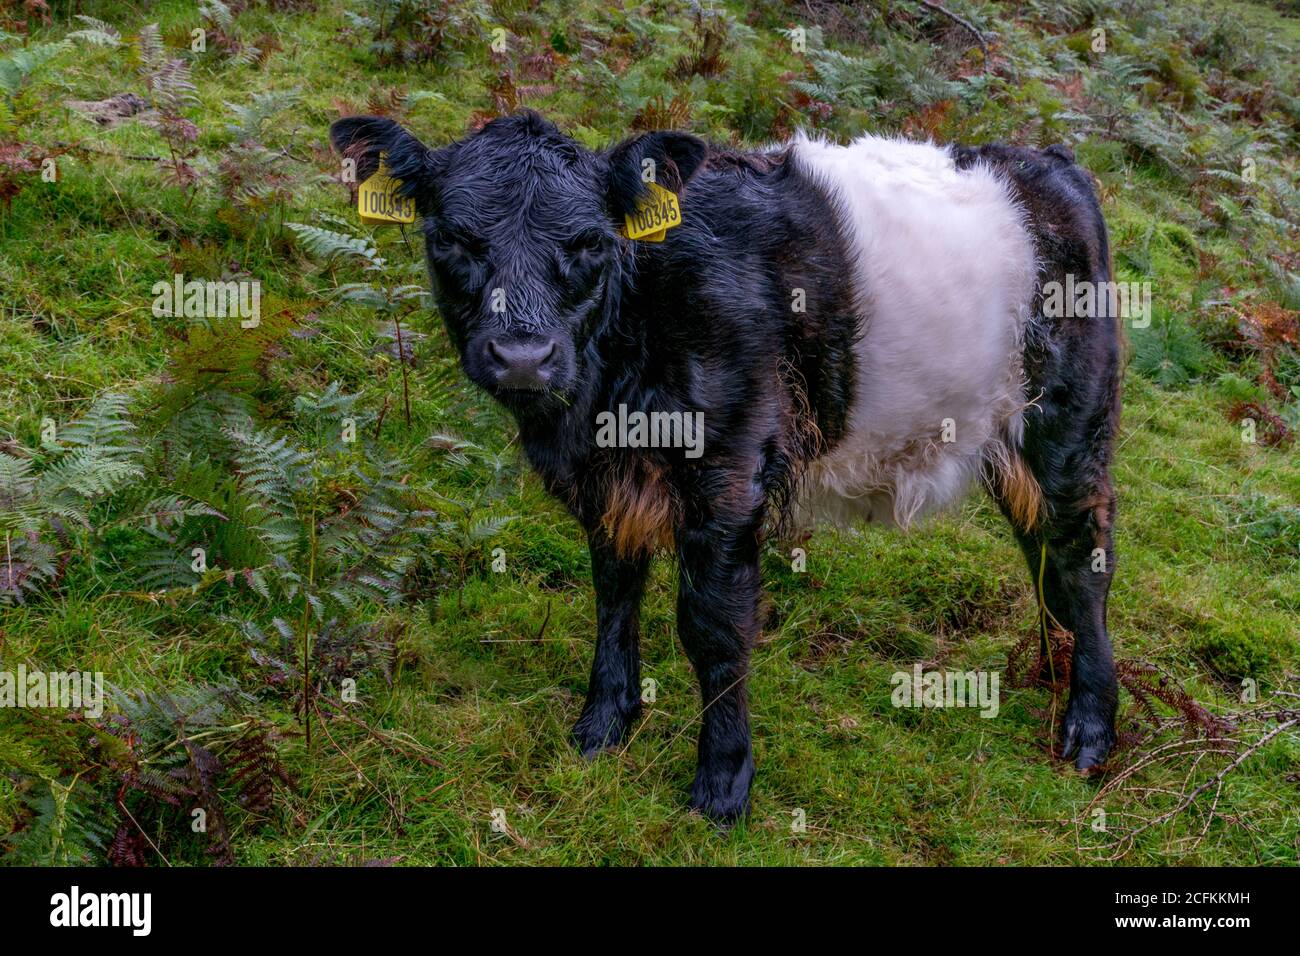 Single black and white calf on the green grass Stock Photo